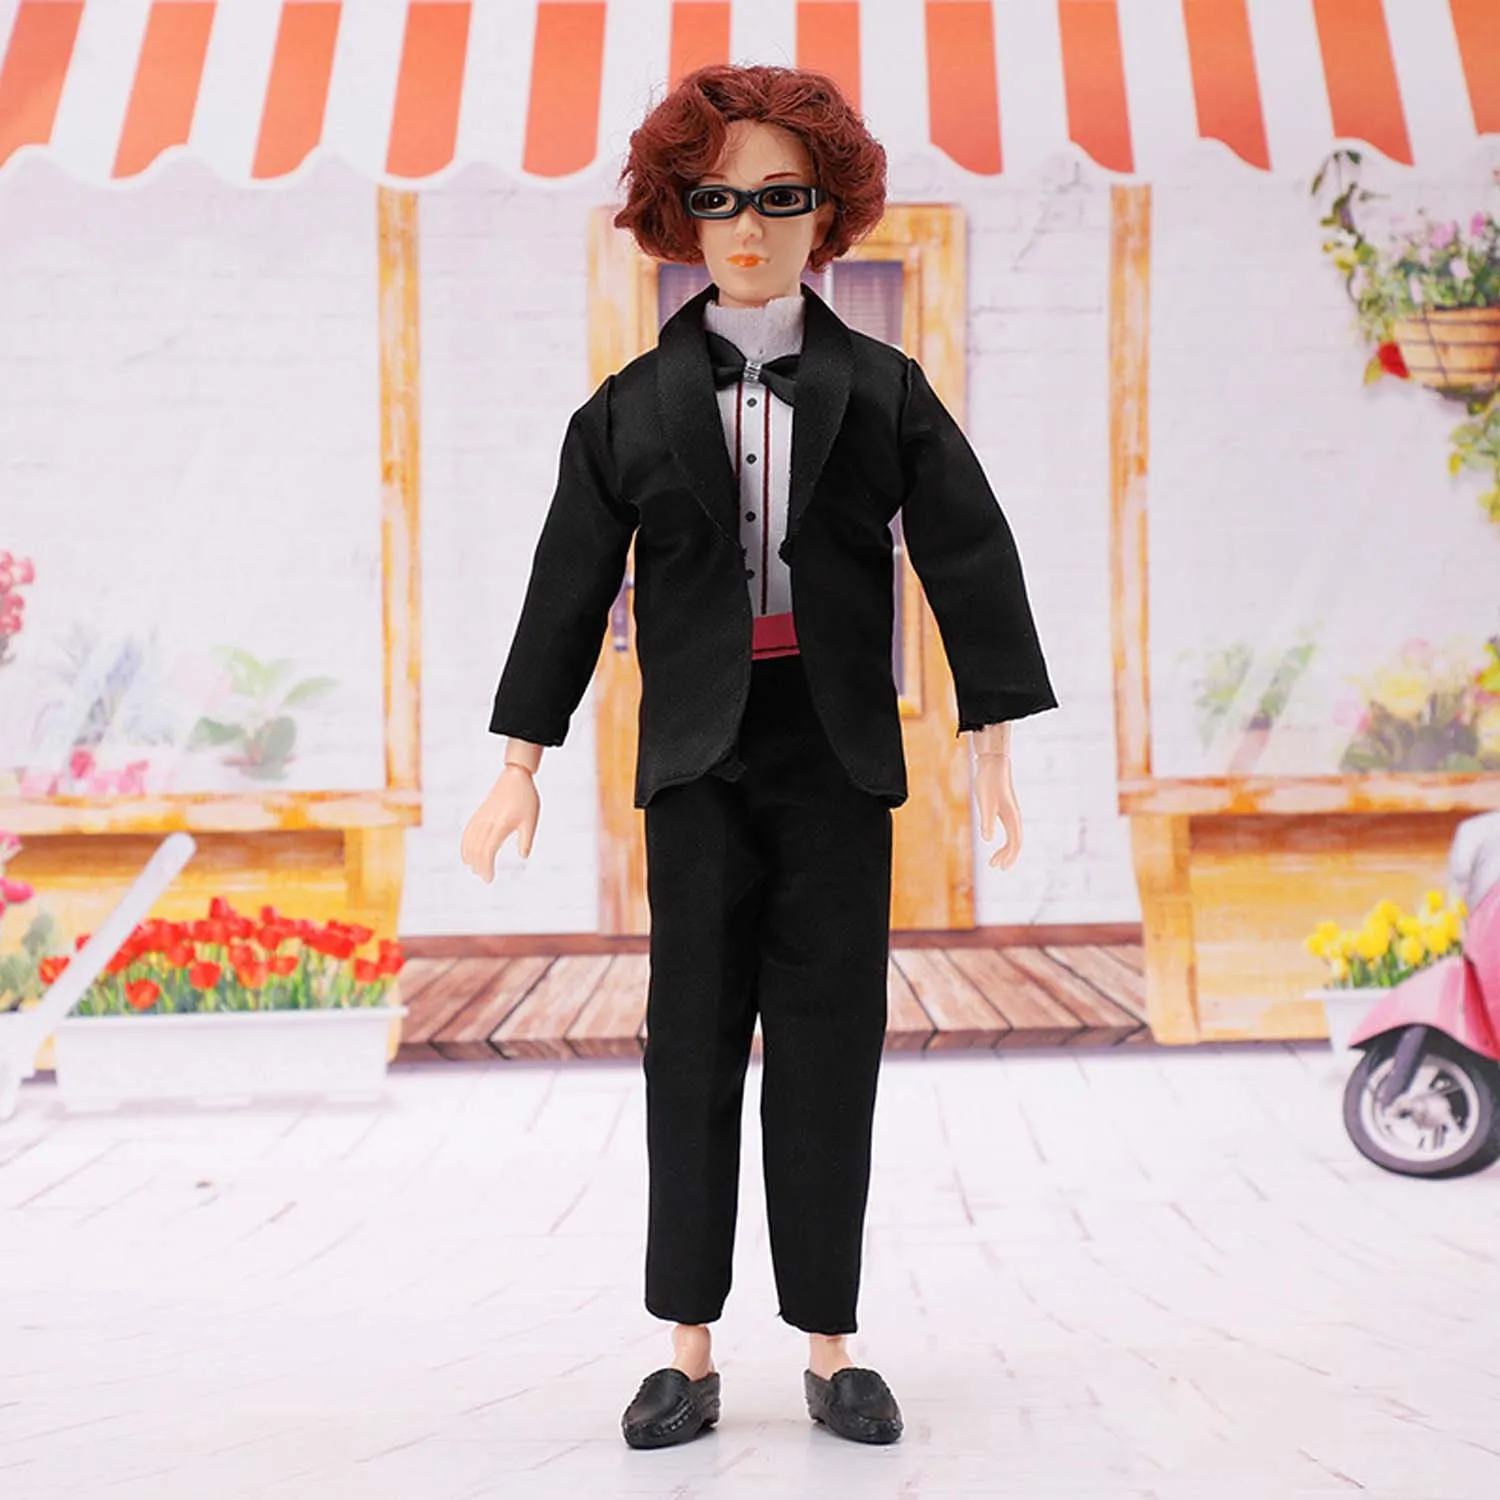 3in1 Fashion Black Suit Coat+Shirt+Pants Clothes For 12 inch Ken Doll B15b 